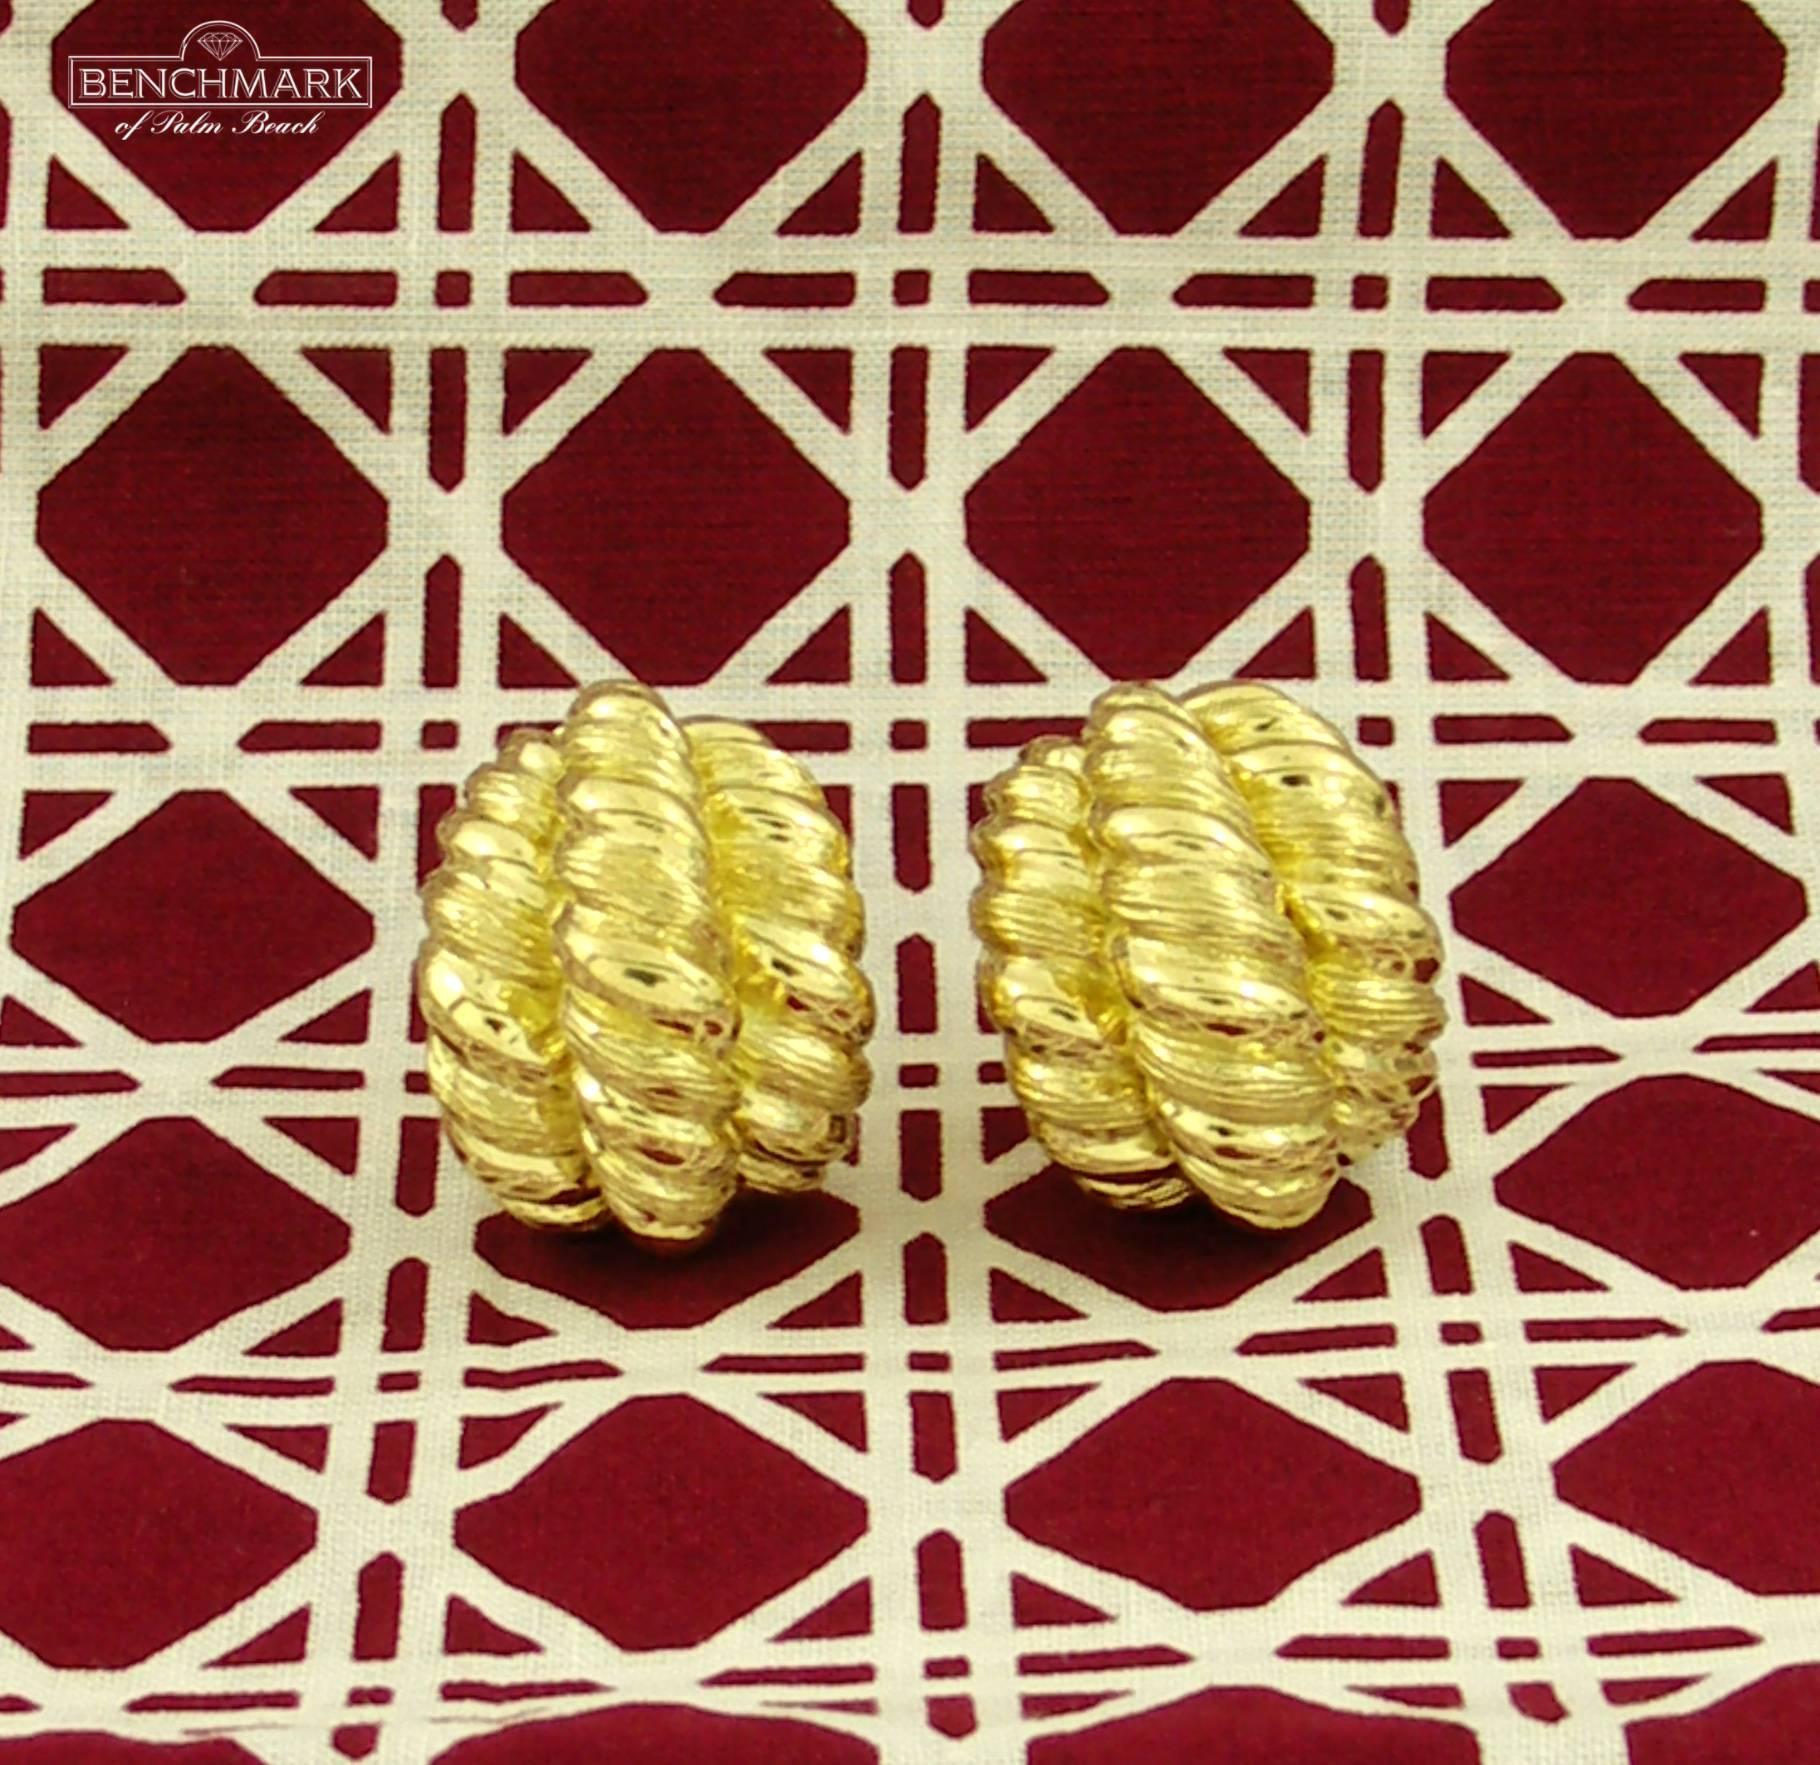 A pair of ladies, 18 karat yellow gold earrings measuring 7/8 of an inch wide, and 1 1/8 inch long, comprised of 3 rows of twisted rope design. With a bombe' front, they have an excellent scale and dimension. These fashionable earrings have omega